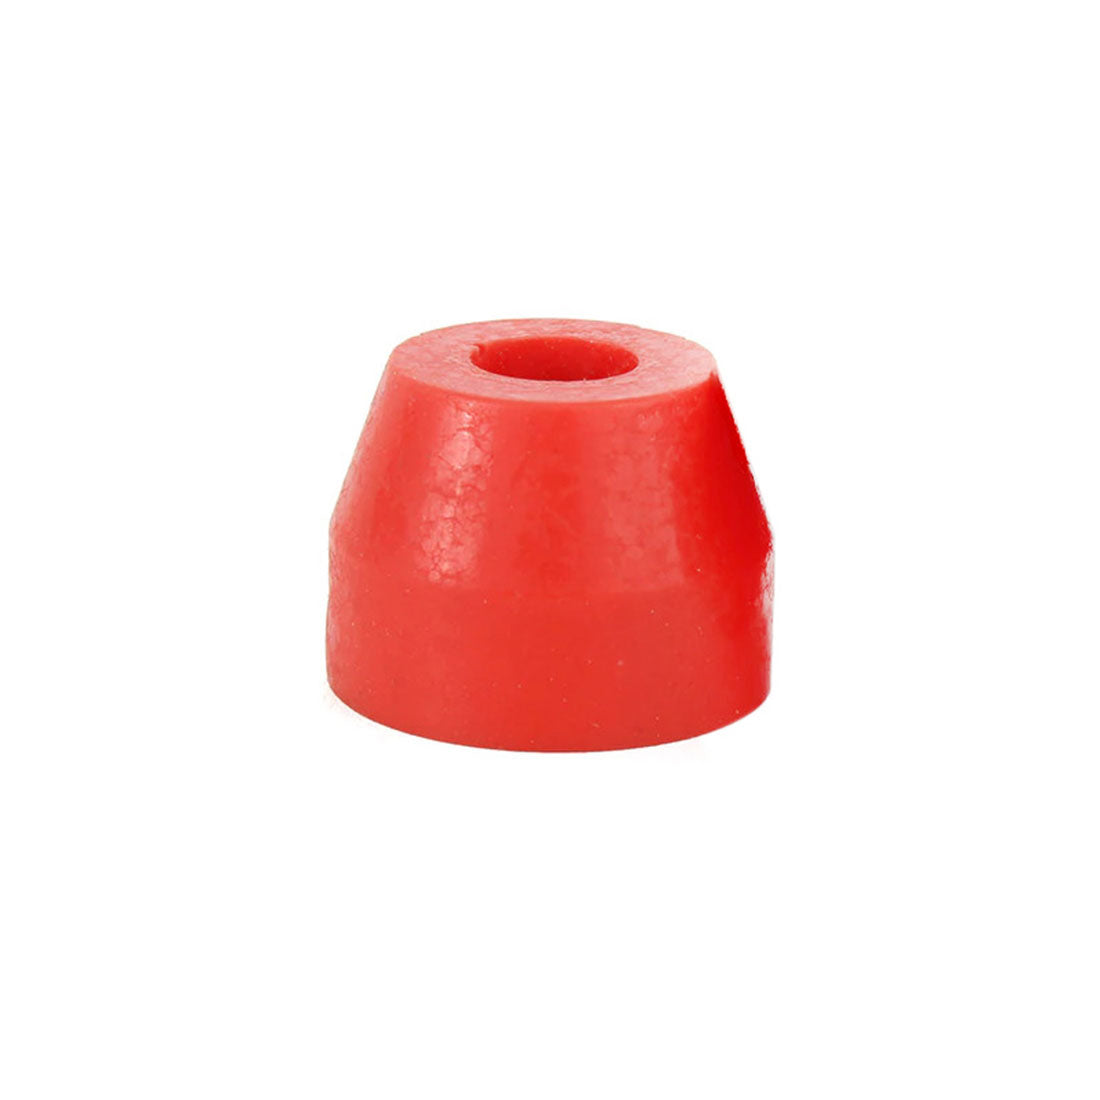 ABEC 11 Reflex Conical Bushing - Single .750&quot; 92a - Red Skateboard Hardware and Parts